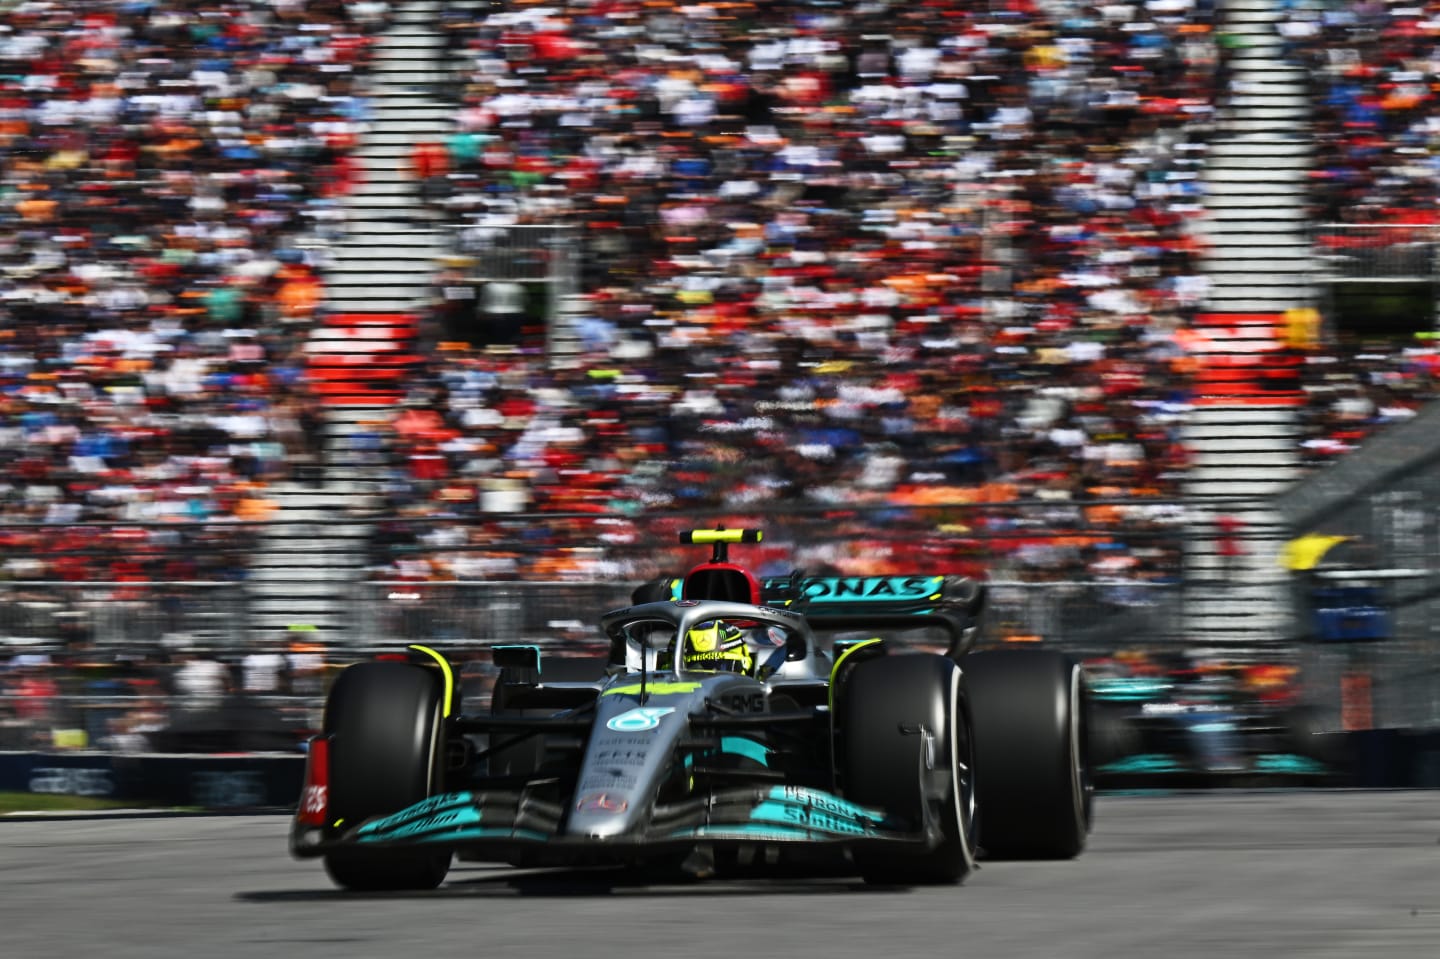 MONTREAL, QUEBEC - JUNE 19: Lewis Hamilton of Great Britain driving the (44) Mercedes AMG Petronas